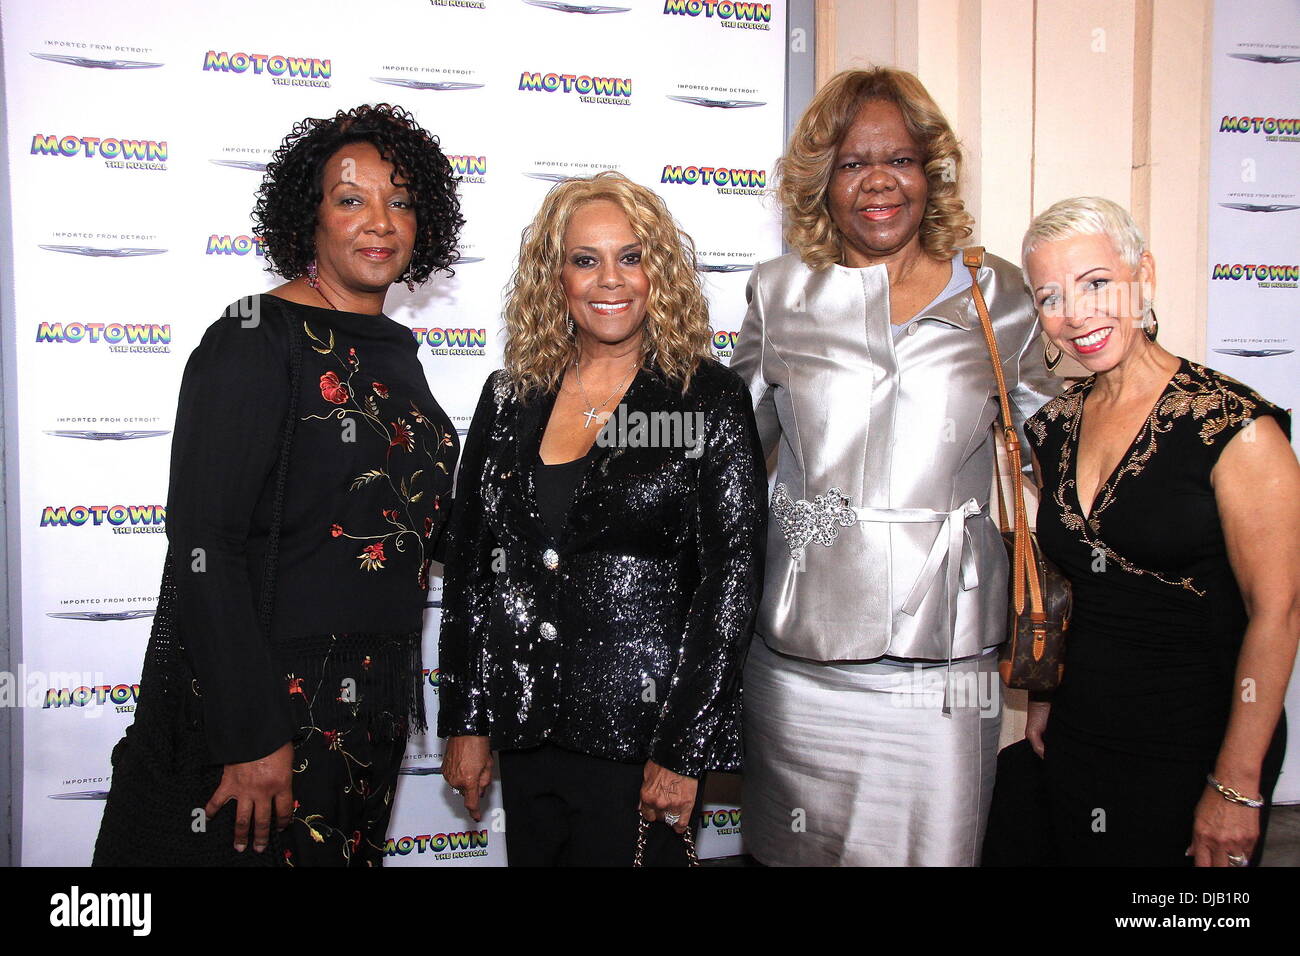 Brenda Boyce, Claudette Robinson, Janie Bradford and Pamela Pruitt The Launch of ‘Motown: The Musical’, held at the Nederlander Theatre – Arrivals. New York City, USA – 27.09.12 Stock Photo